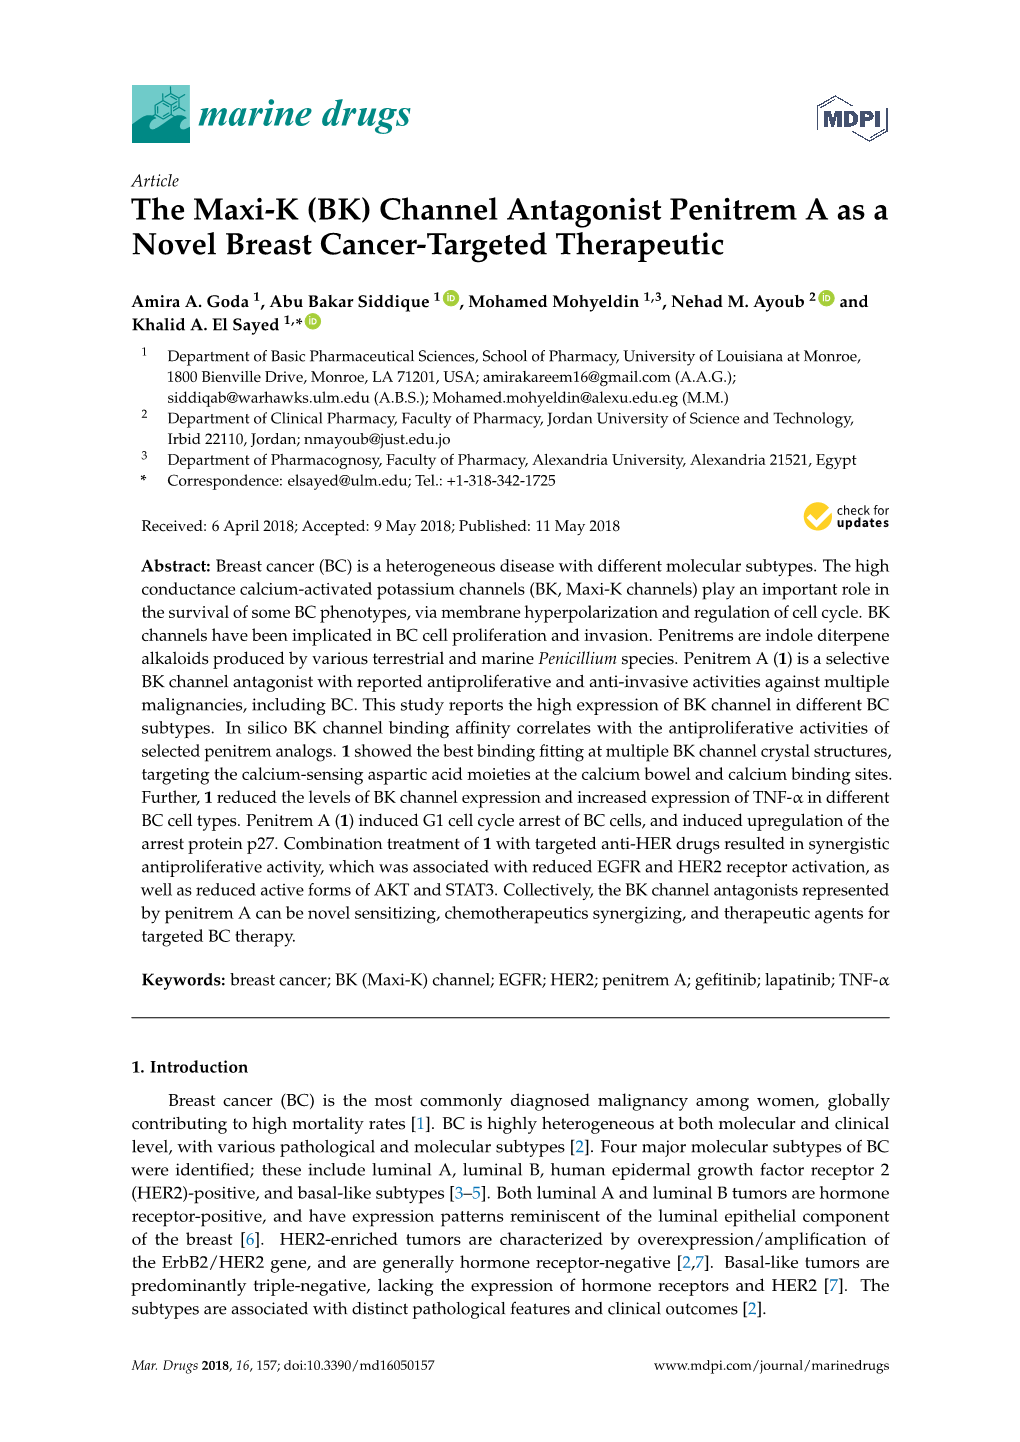 (BK) Channel Antagonist Penitrem a As a Novel Breast Cancer-Targeted Therapeutic